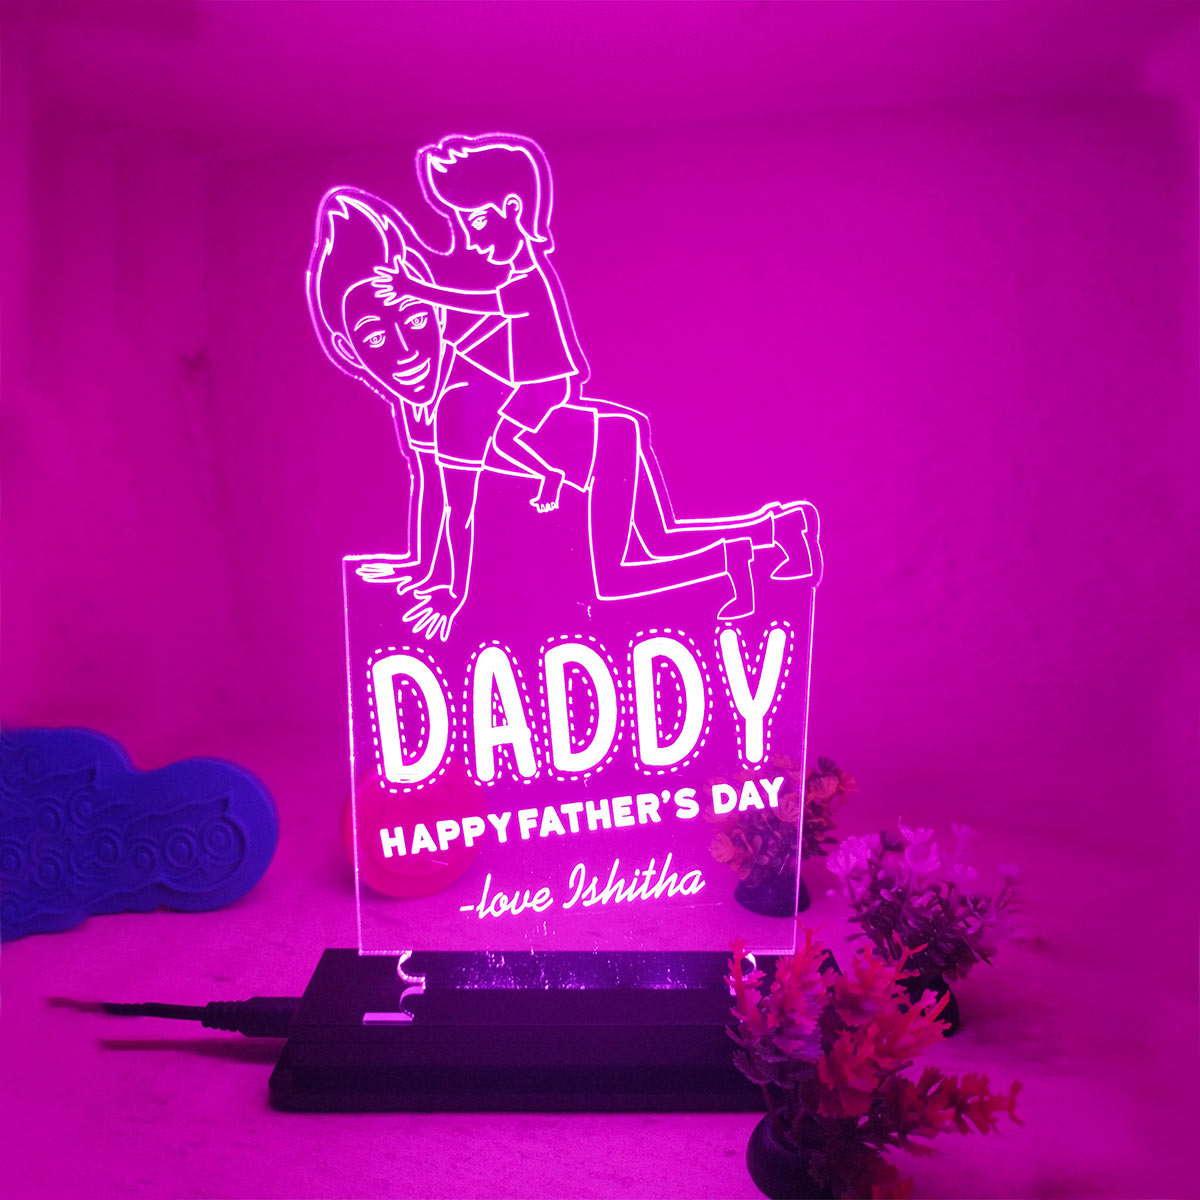 Personalised Daddy Led 3D illusion LED Lamp